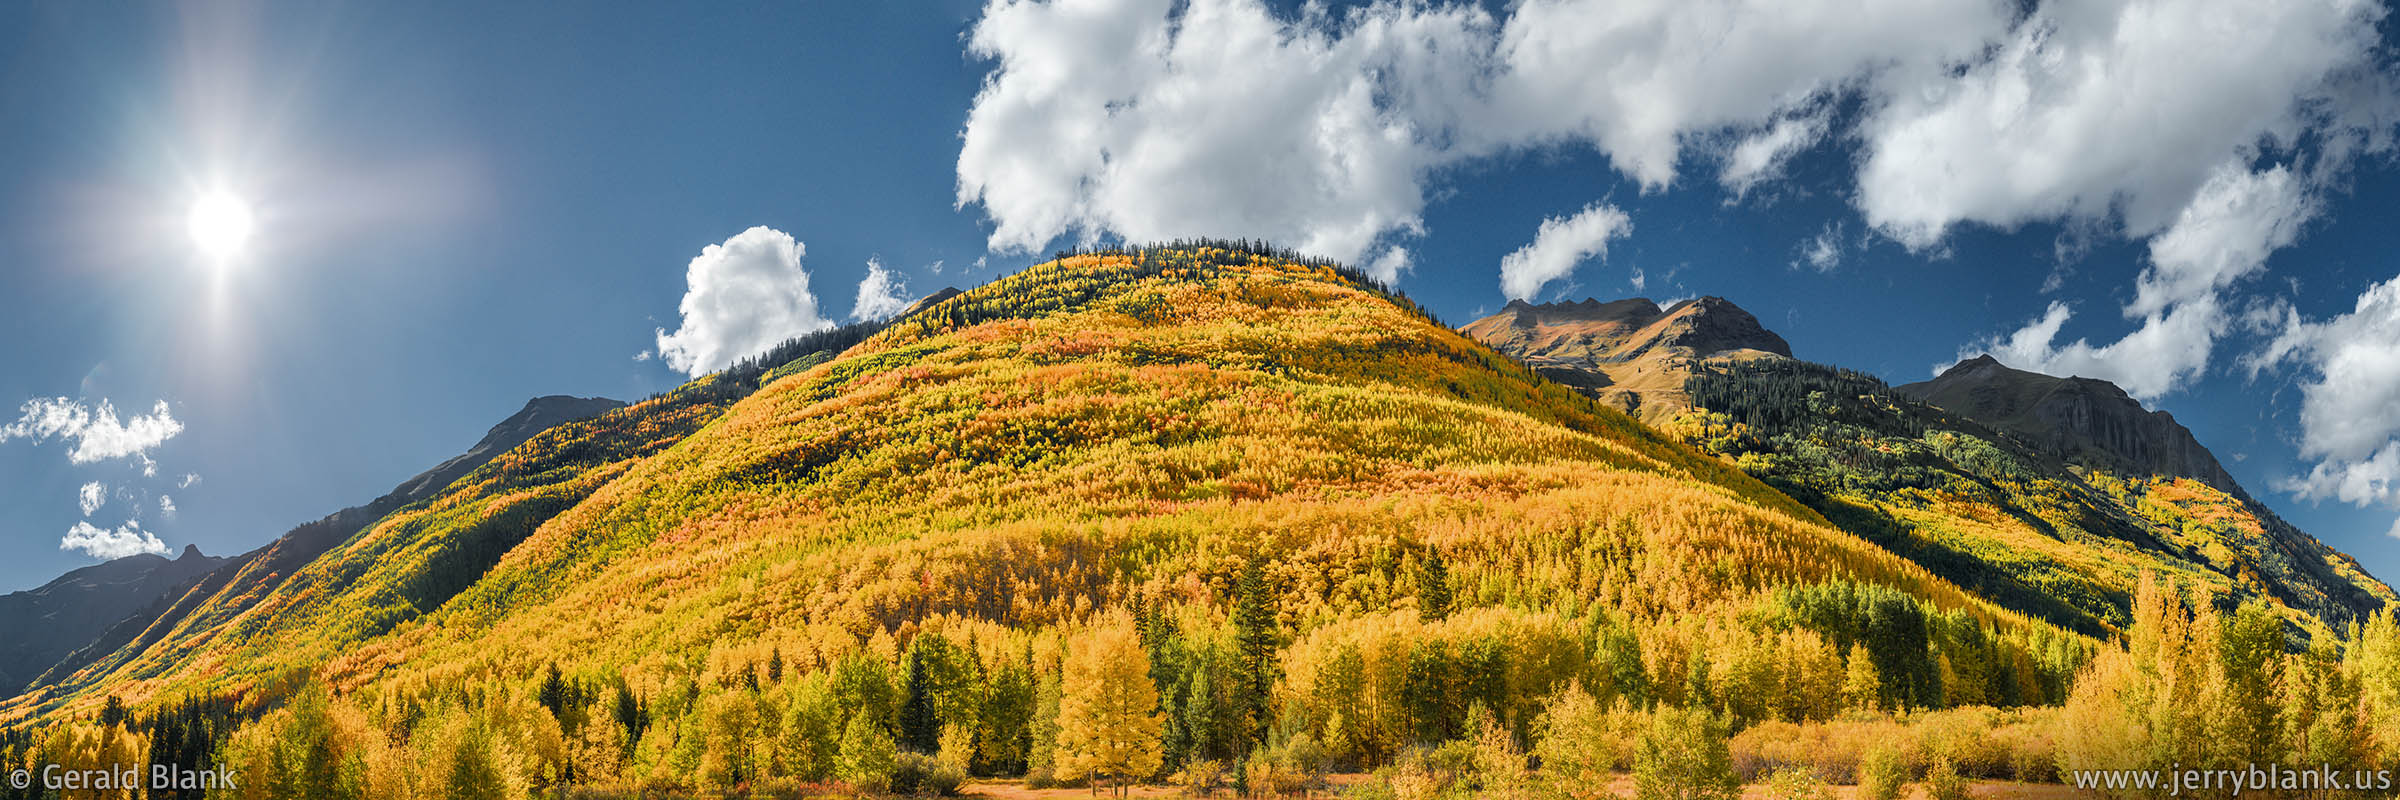 #43766 - An amazing panorama of autumn color on the foothills of Hayden Mountain in Colorado, as seen from US Hwy. 550 south of Ouray